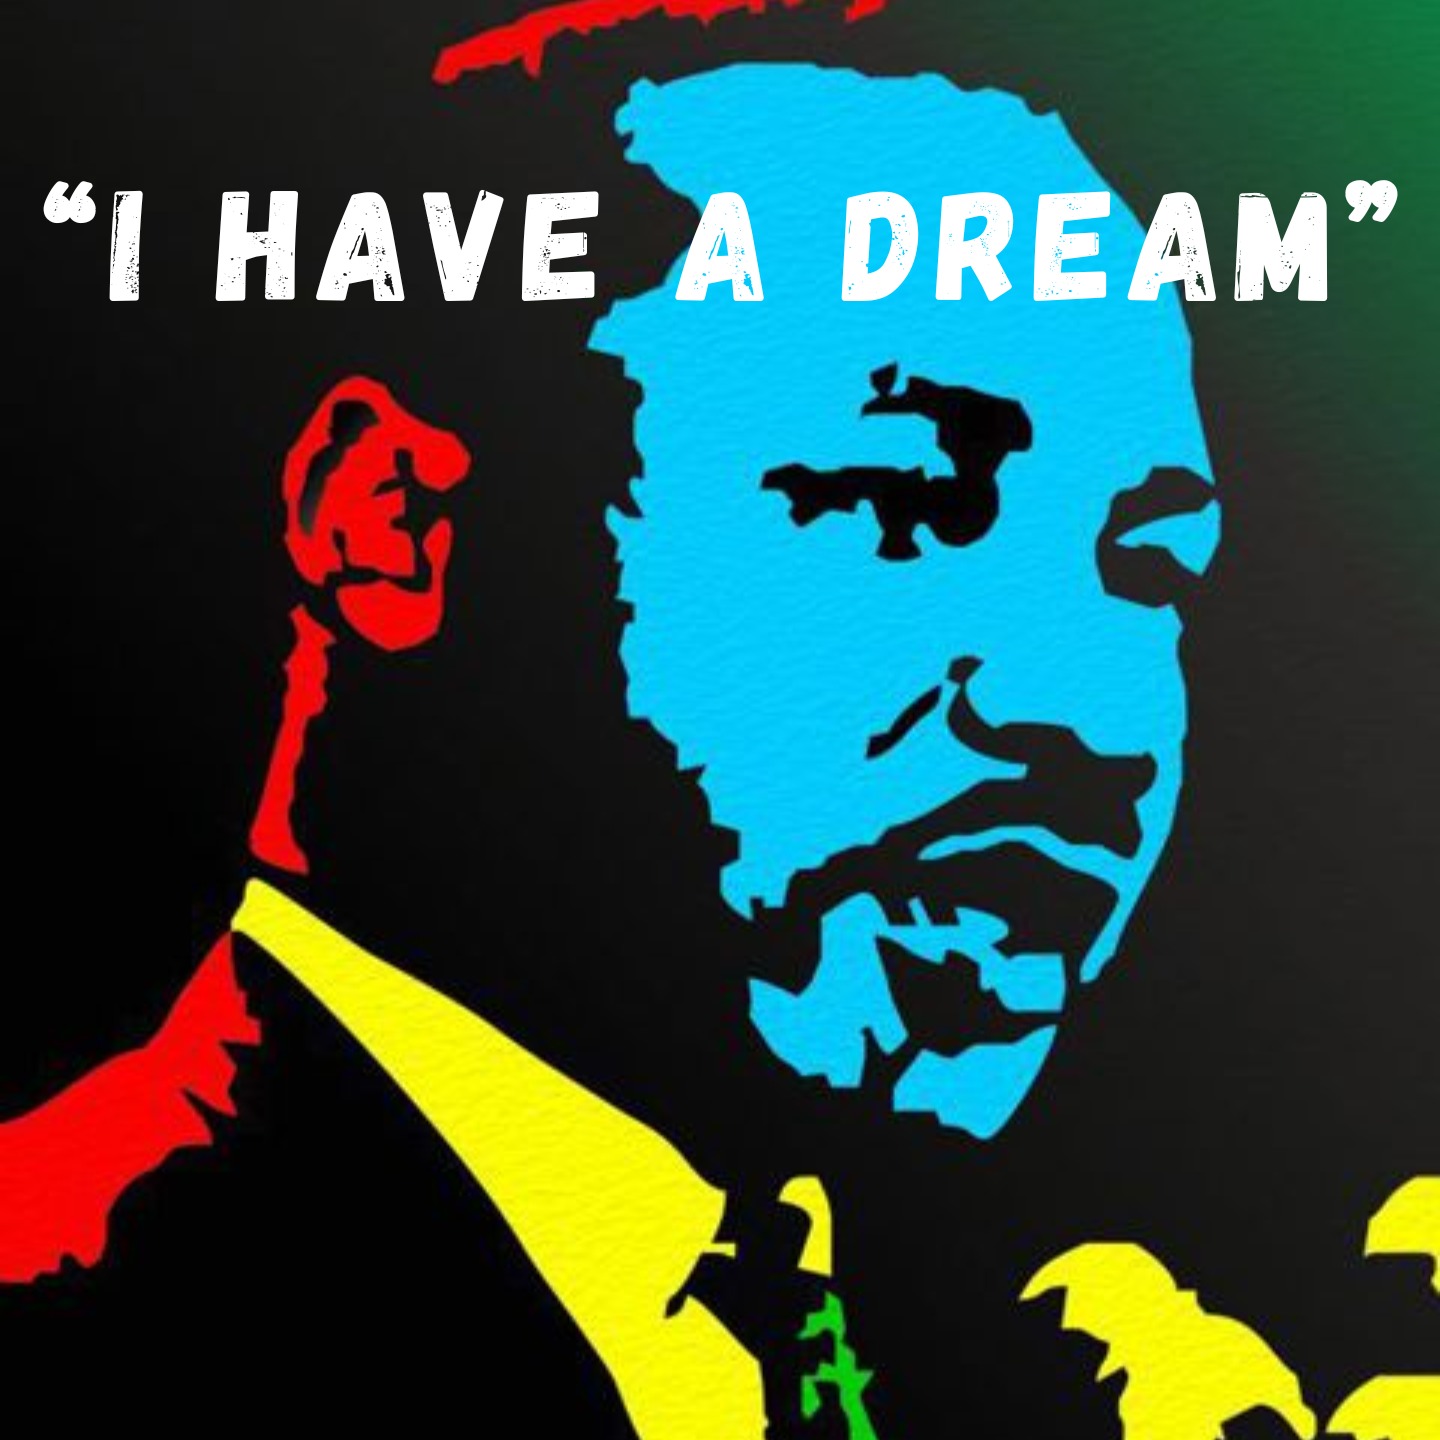 "I have a Dream" - Speech by Dr. Martin Luther King Jr